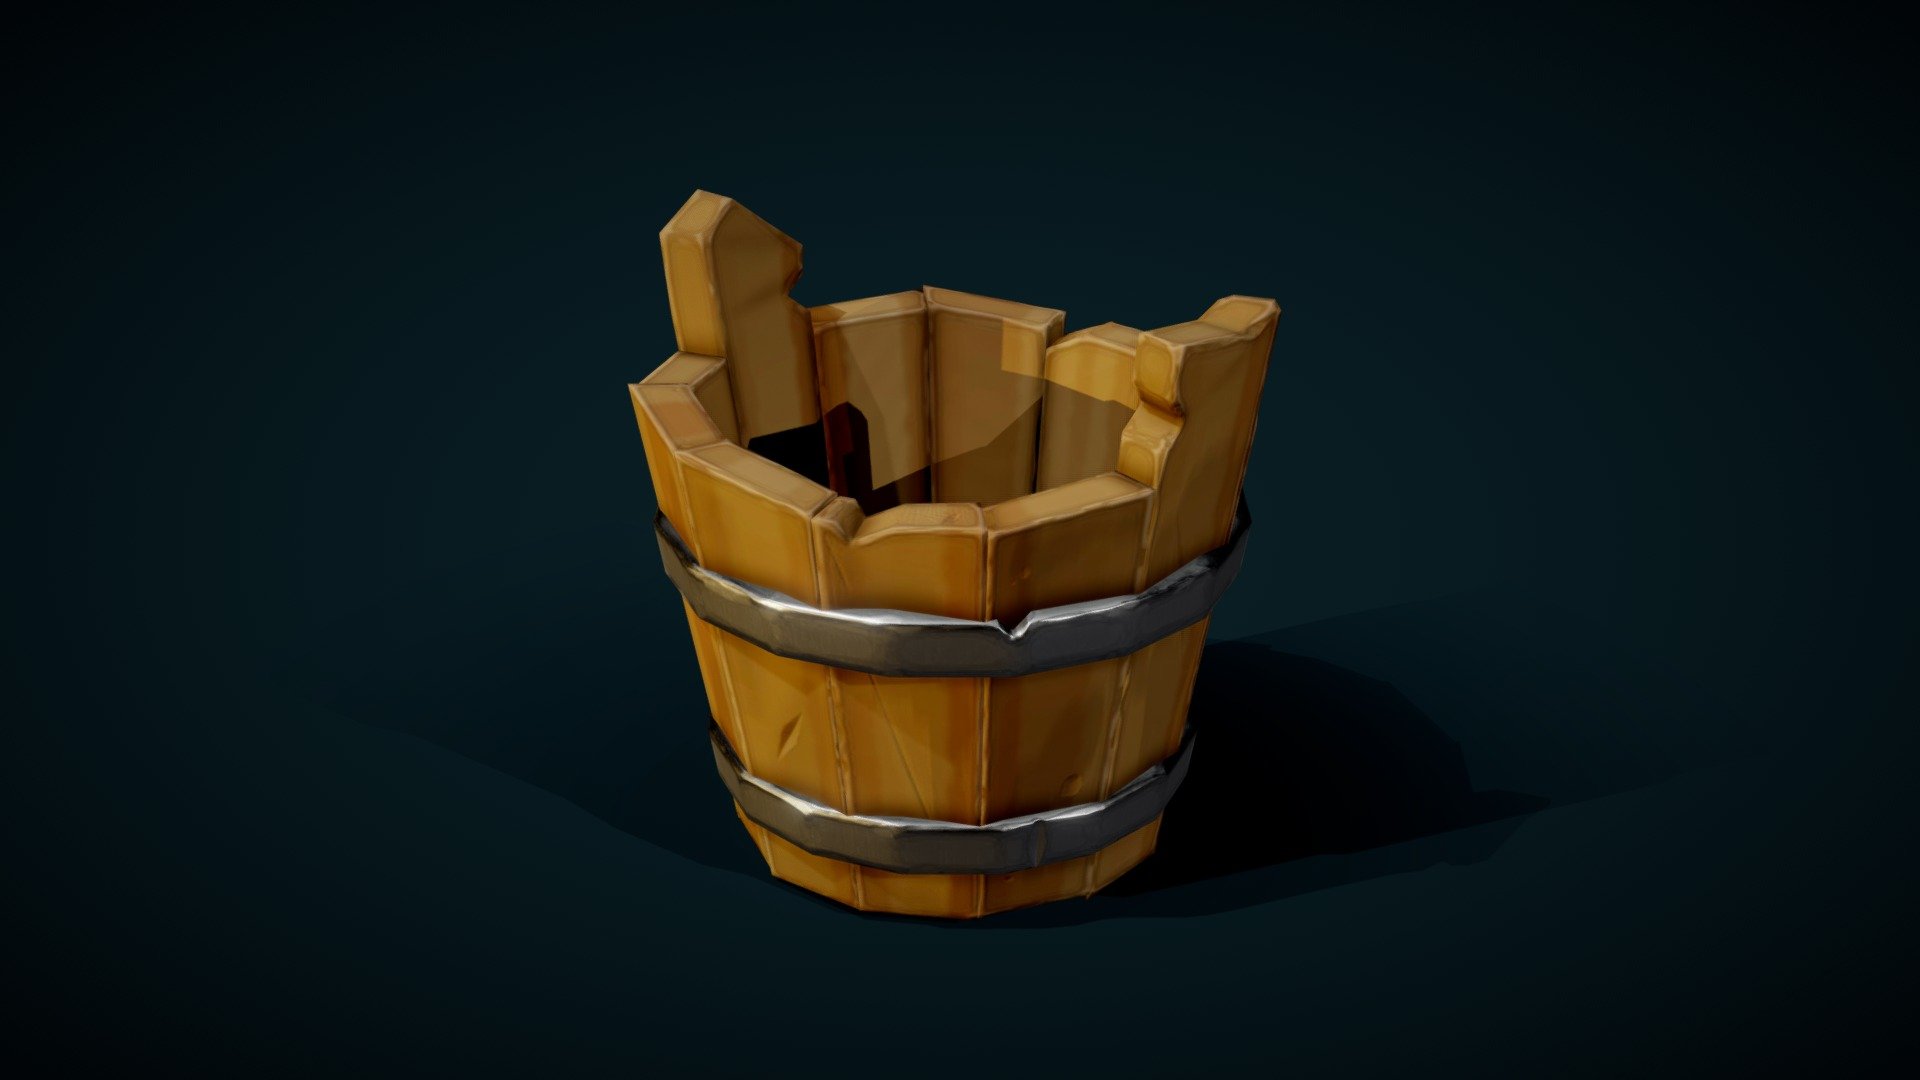 Bucket. Can be used for water, beer or something.
May be, it can help u to save ur ship ) - Stylized Bucket - 3D model by Lisov1k 3d model